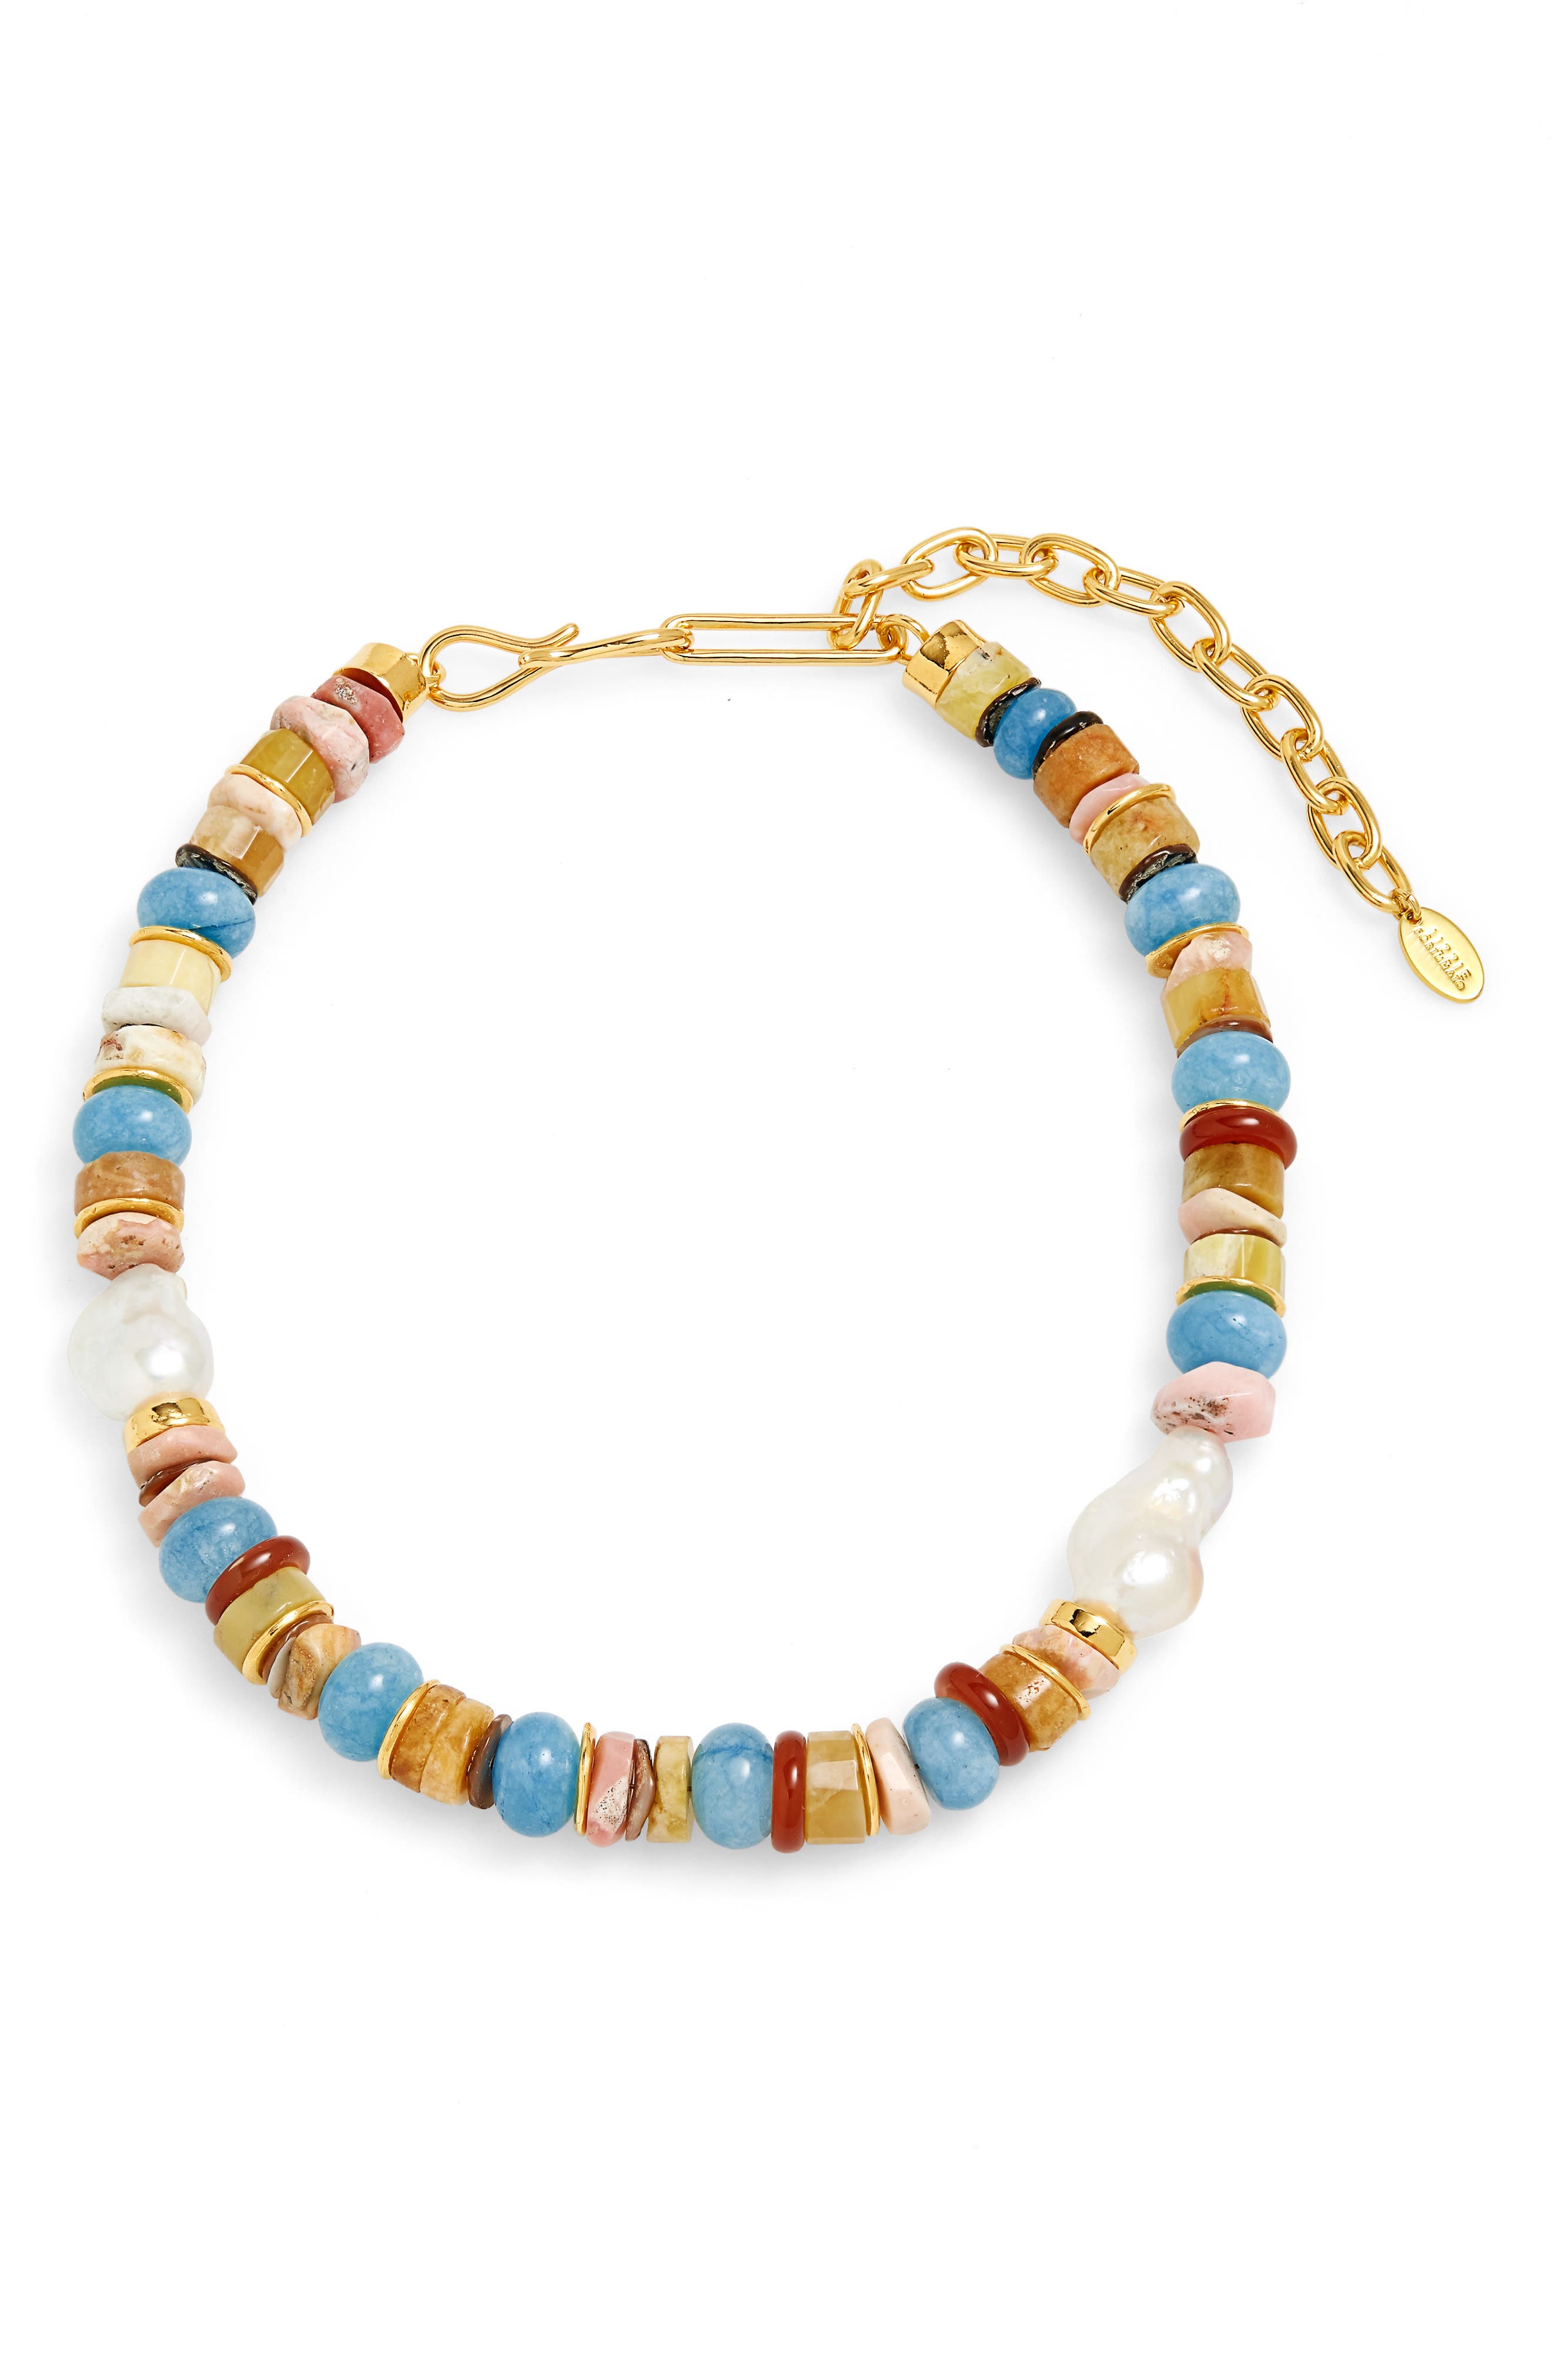 Lizzie Fortunato Botanic Beaded Necklace in Multi at Nordstrom